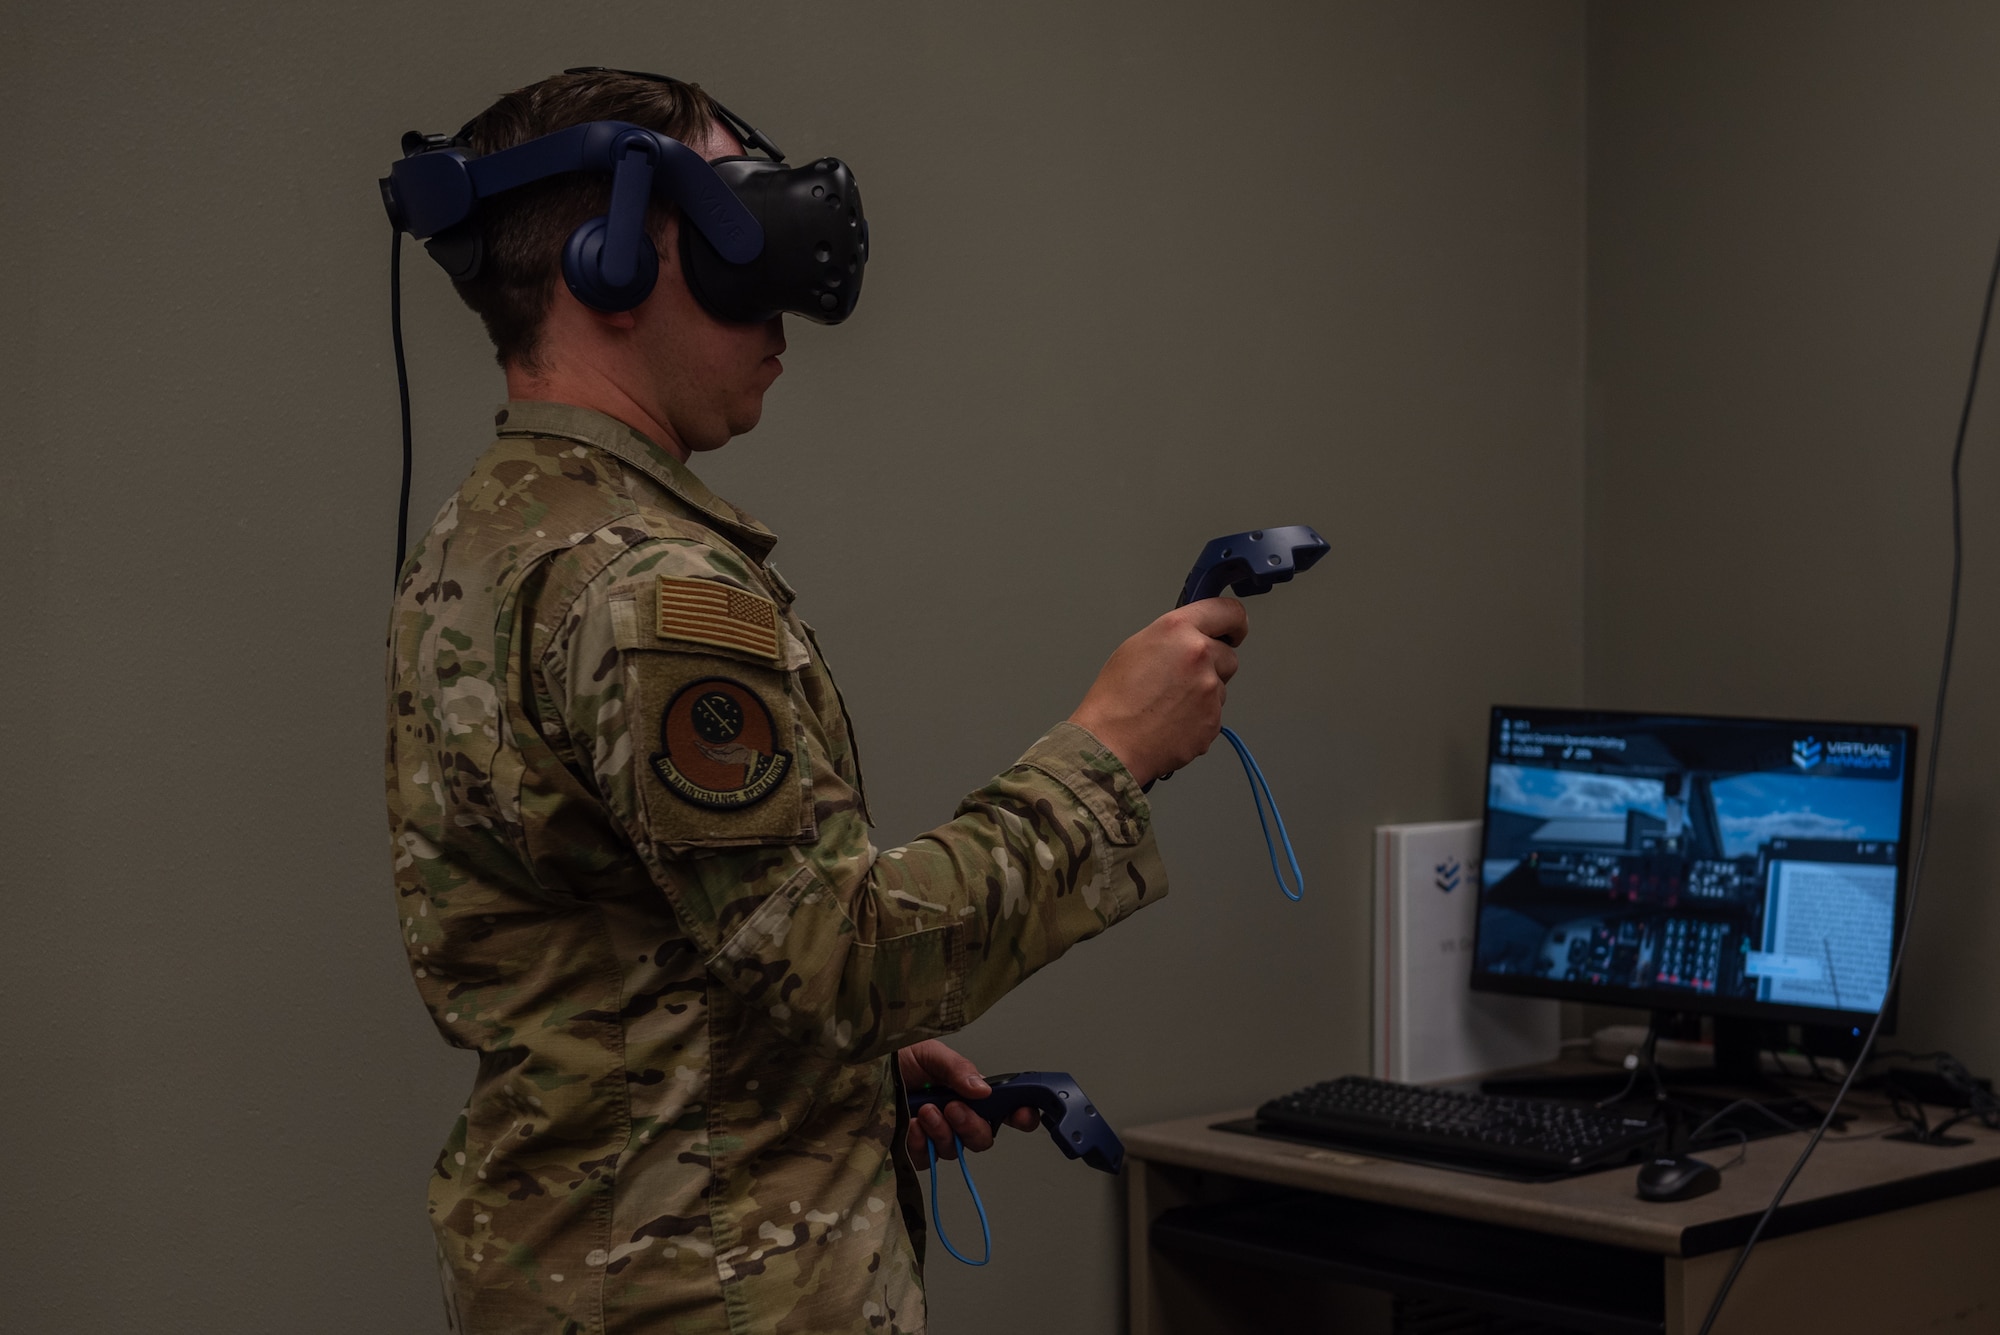 U.S. Air Force Tech. Sgt. Christian Klimek, 92nd Maintenance Group Maintenance Qualification Training Program instructor, demonstrates the virtual reality headset modules for the KC-135 Stratotanker at Fairchild Air Force Base, Washington, July 14, 2022. Benefits of the new training technology include reducing the amount of time it would take to train an Airman on pushing an aircraft back, instructors now being able to provide more specific feedback within the virtual space, and projected savings up to $172 million in fuel, manning and equipment per year. (U.S. Air Force photo by Airman 1st Class Morgan Dailey)